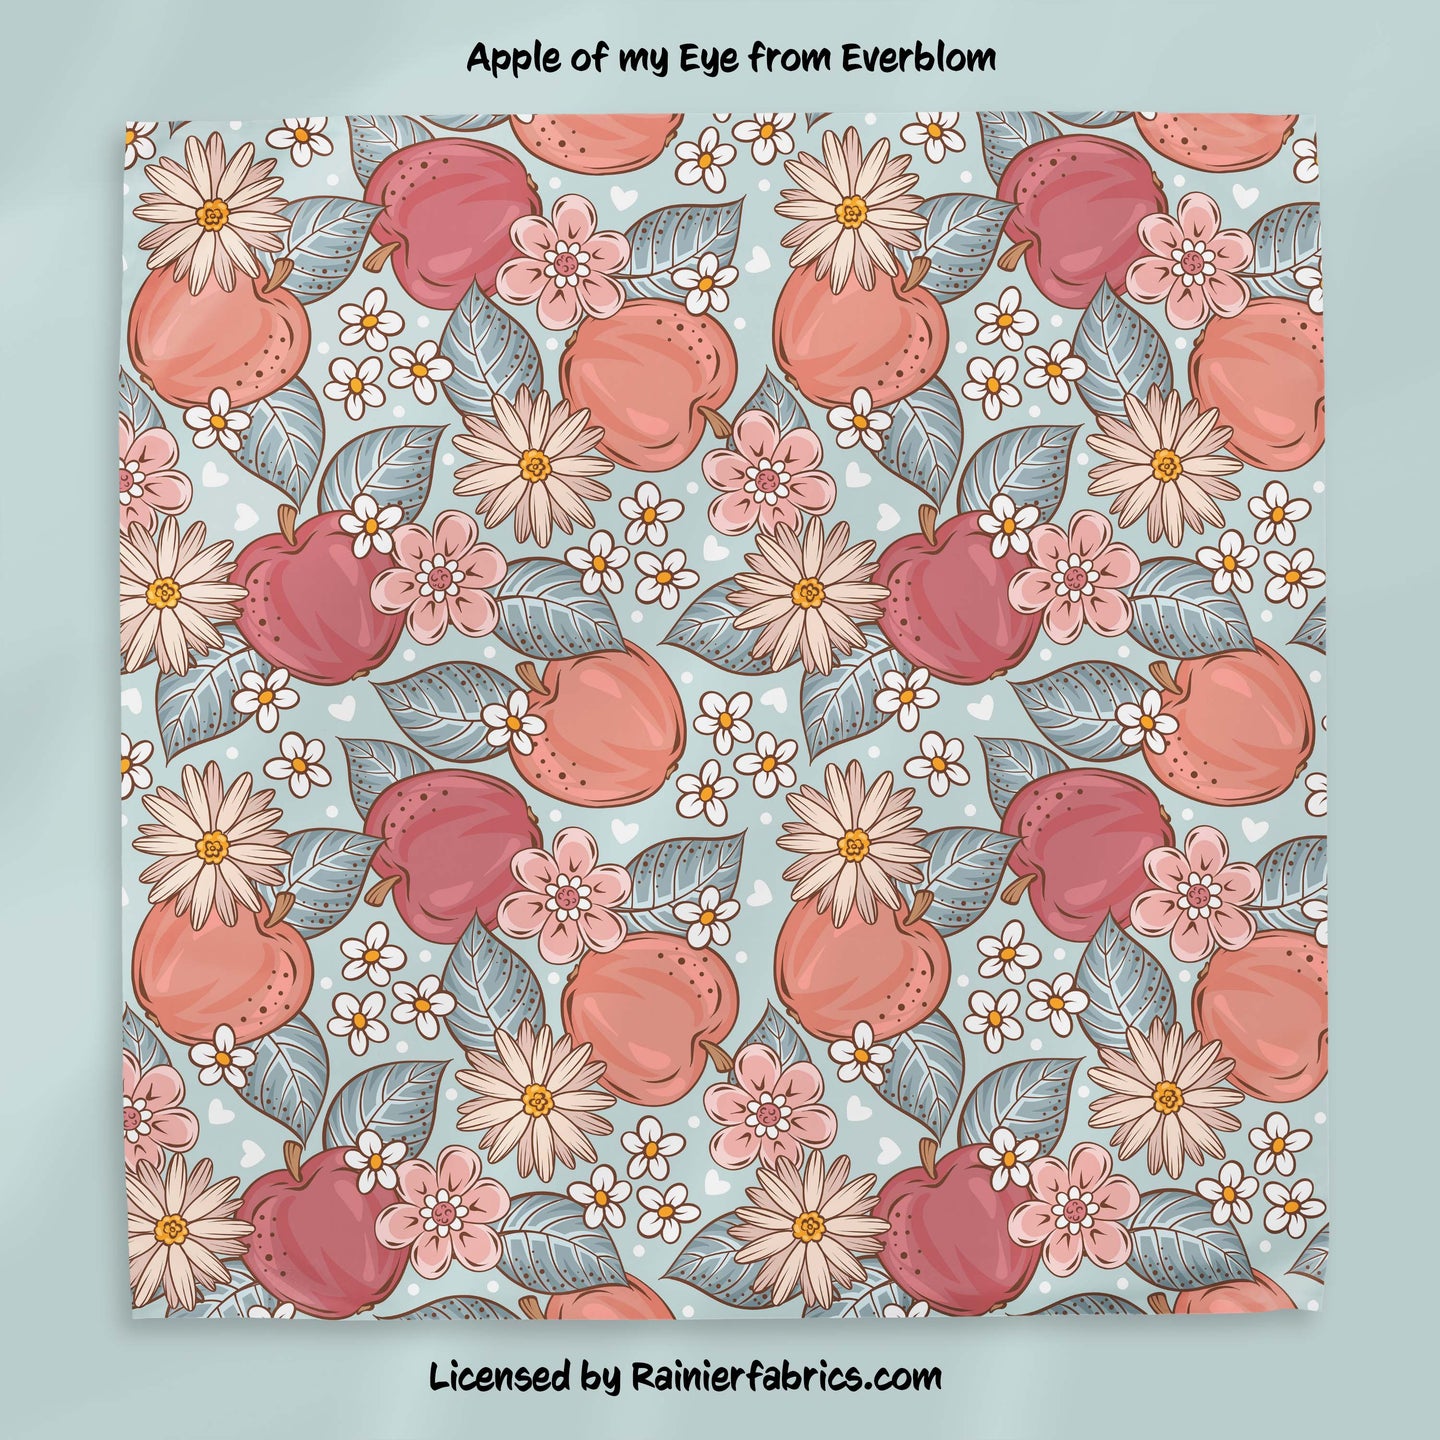 Apple of Your Eye by Everbloom - 2-5 day TAT - Order by 1/2 yard; Blankets and towels available too